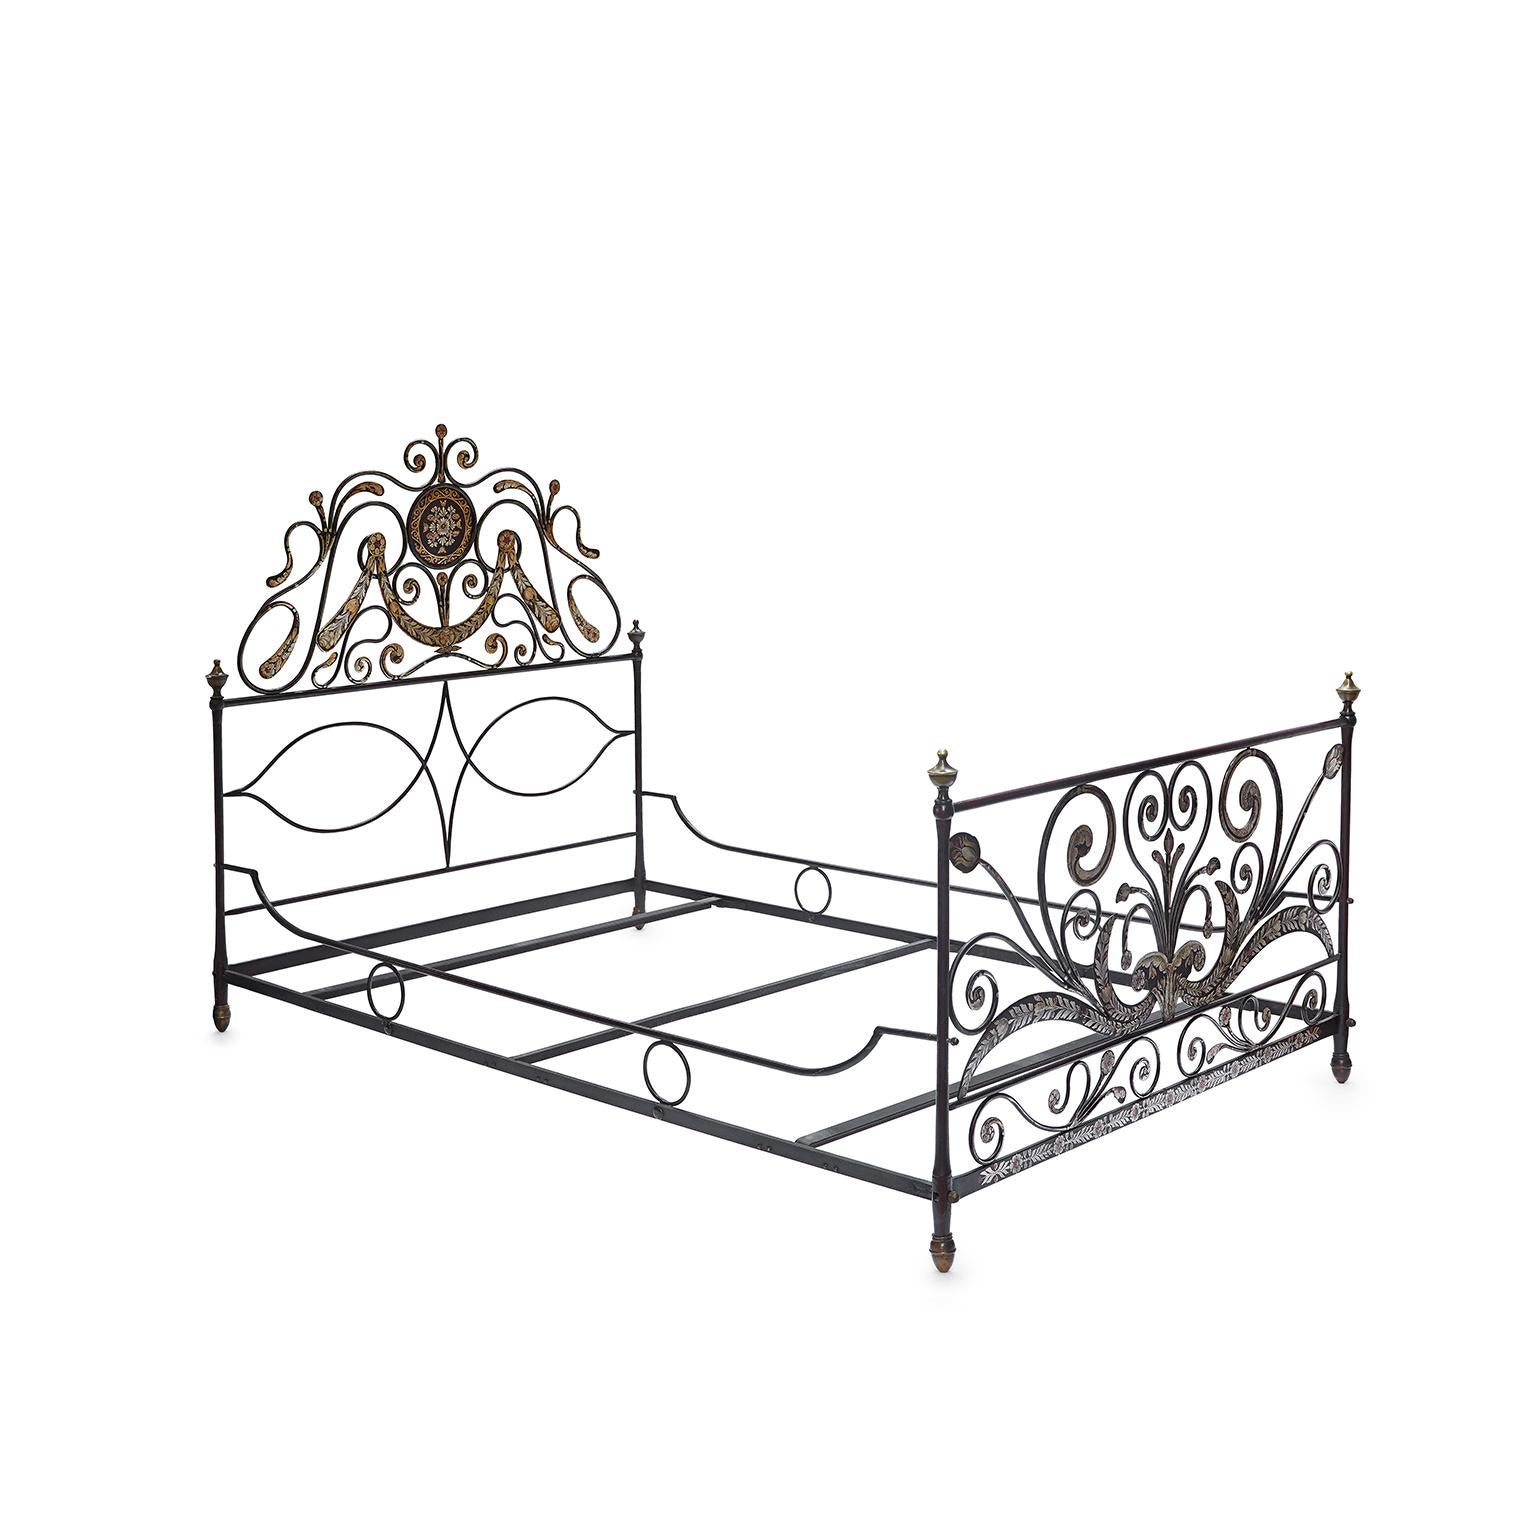 19th Century Italian Genoese Wrought Iron Full-size Bed with Floral Painting For Sale 4